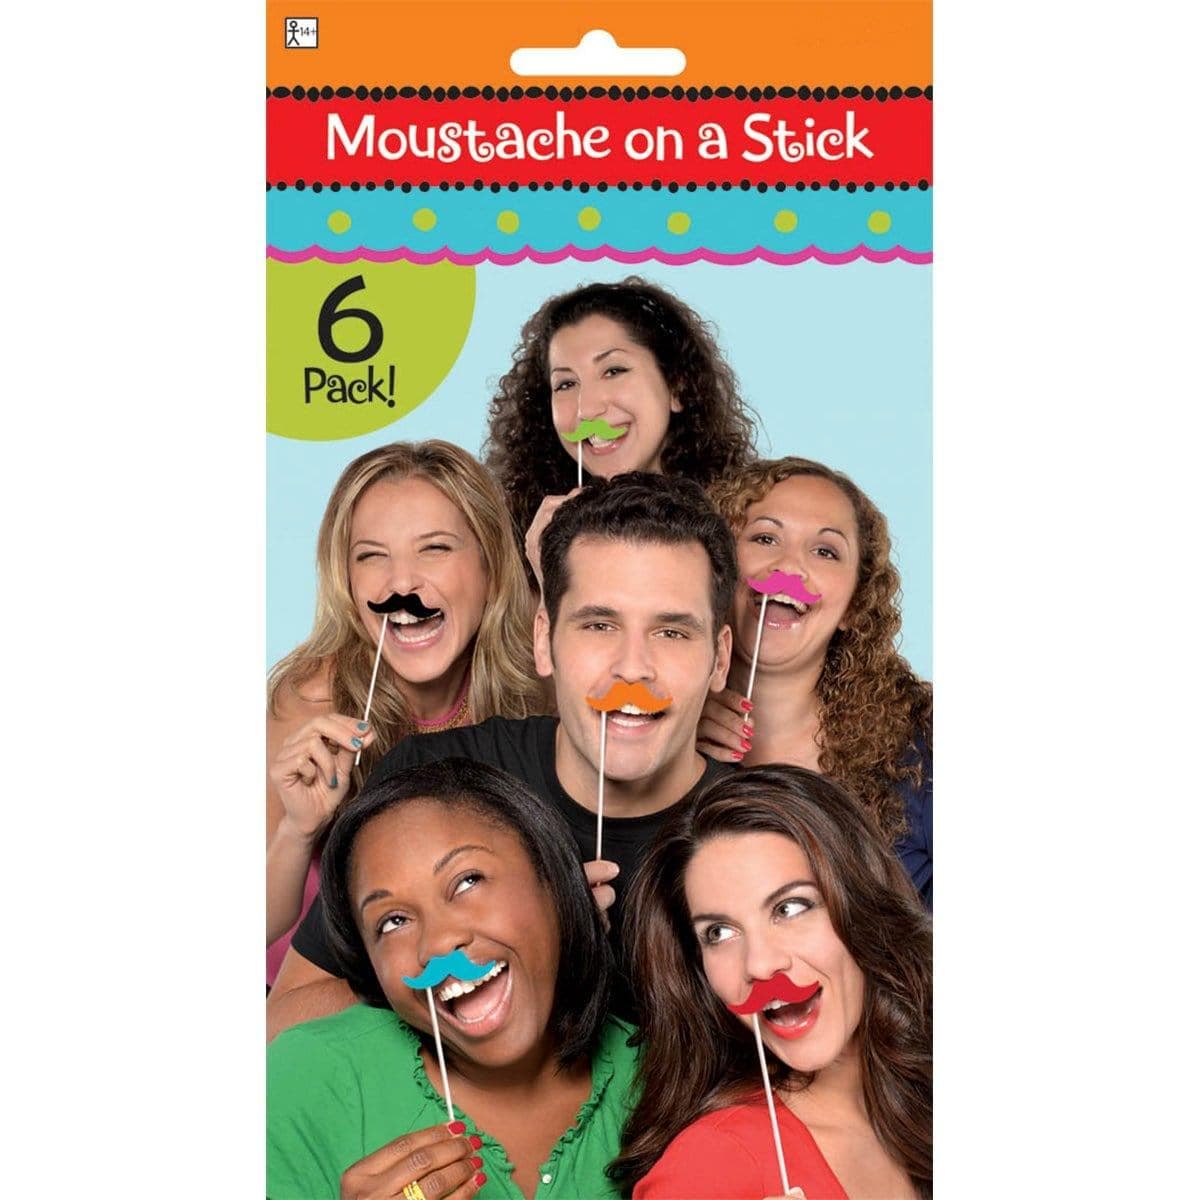 Buy Theme Party Mustache Photo Booth Props, 6 per Package sold at Party Expert